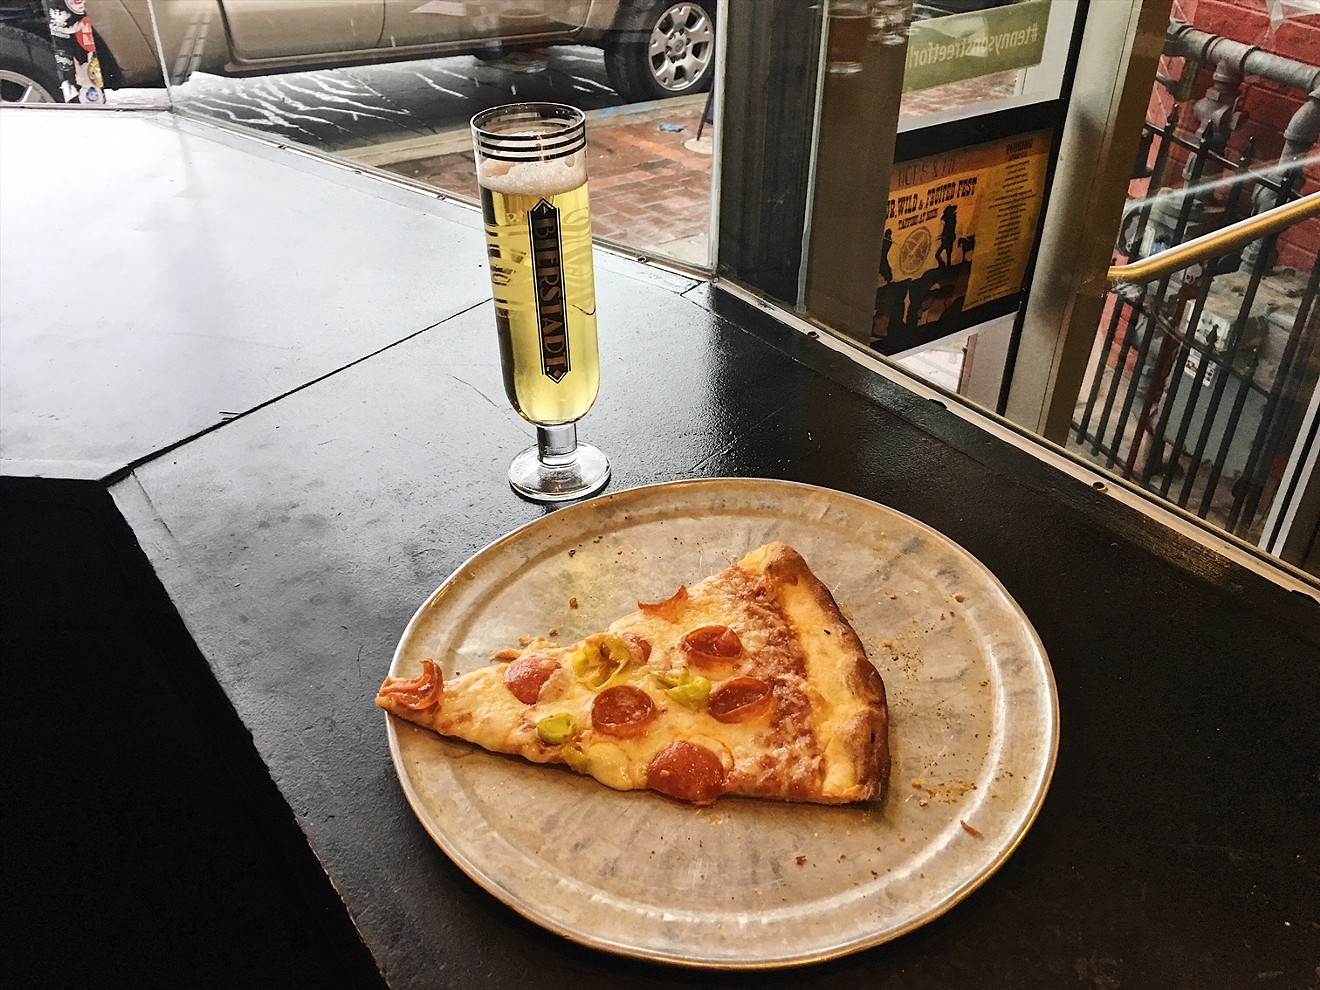 With happy hour slice pricing and $2 pilsners on Thursday, you can feast cheaply at Hops & Pie.